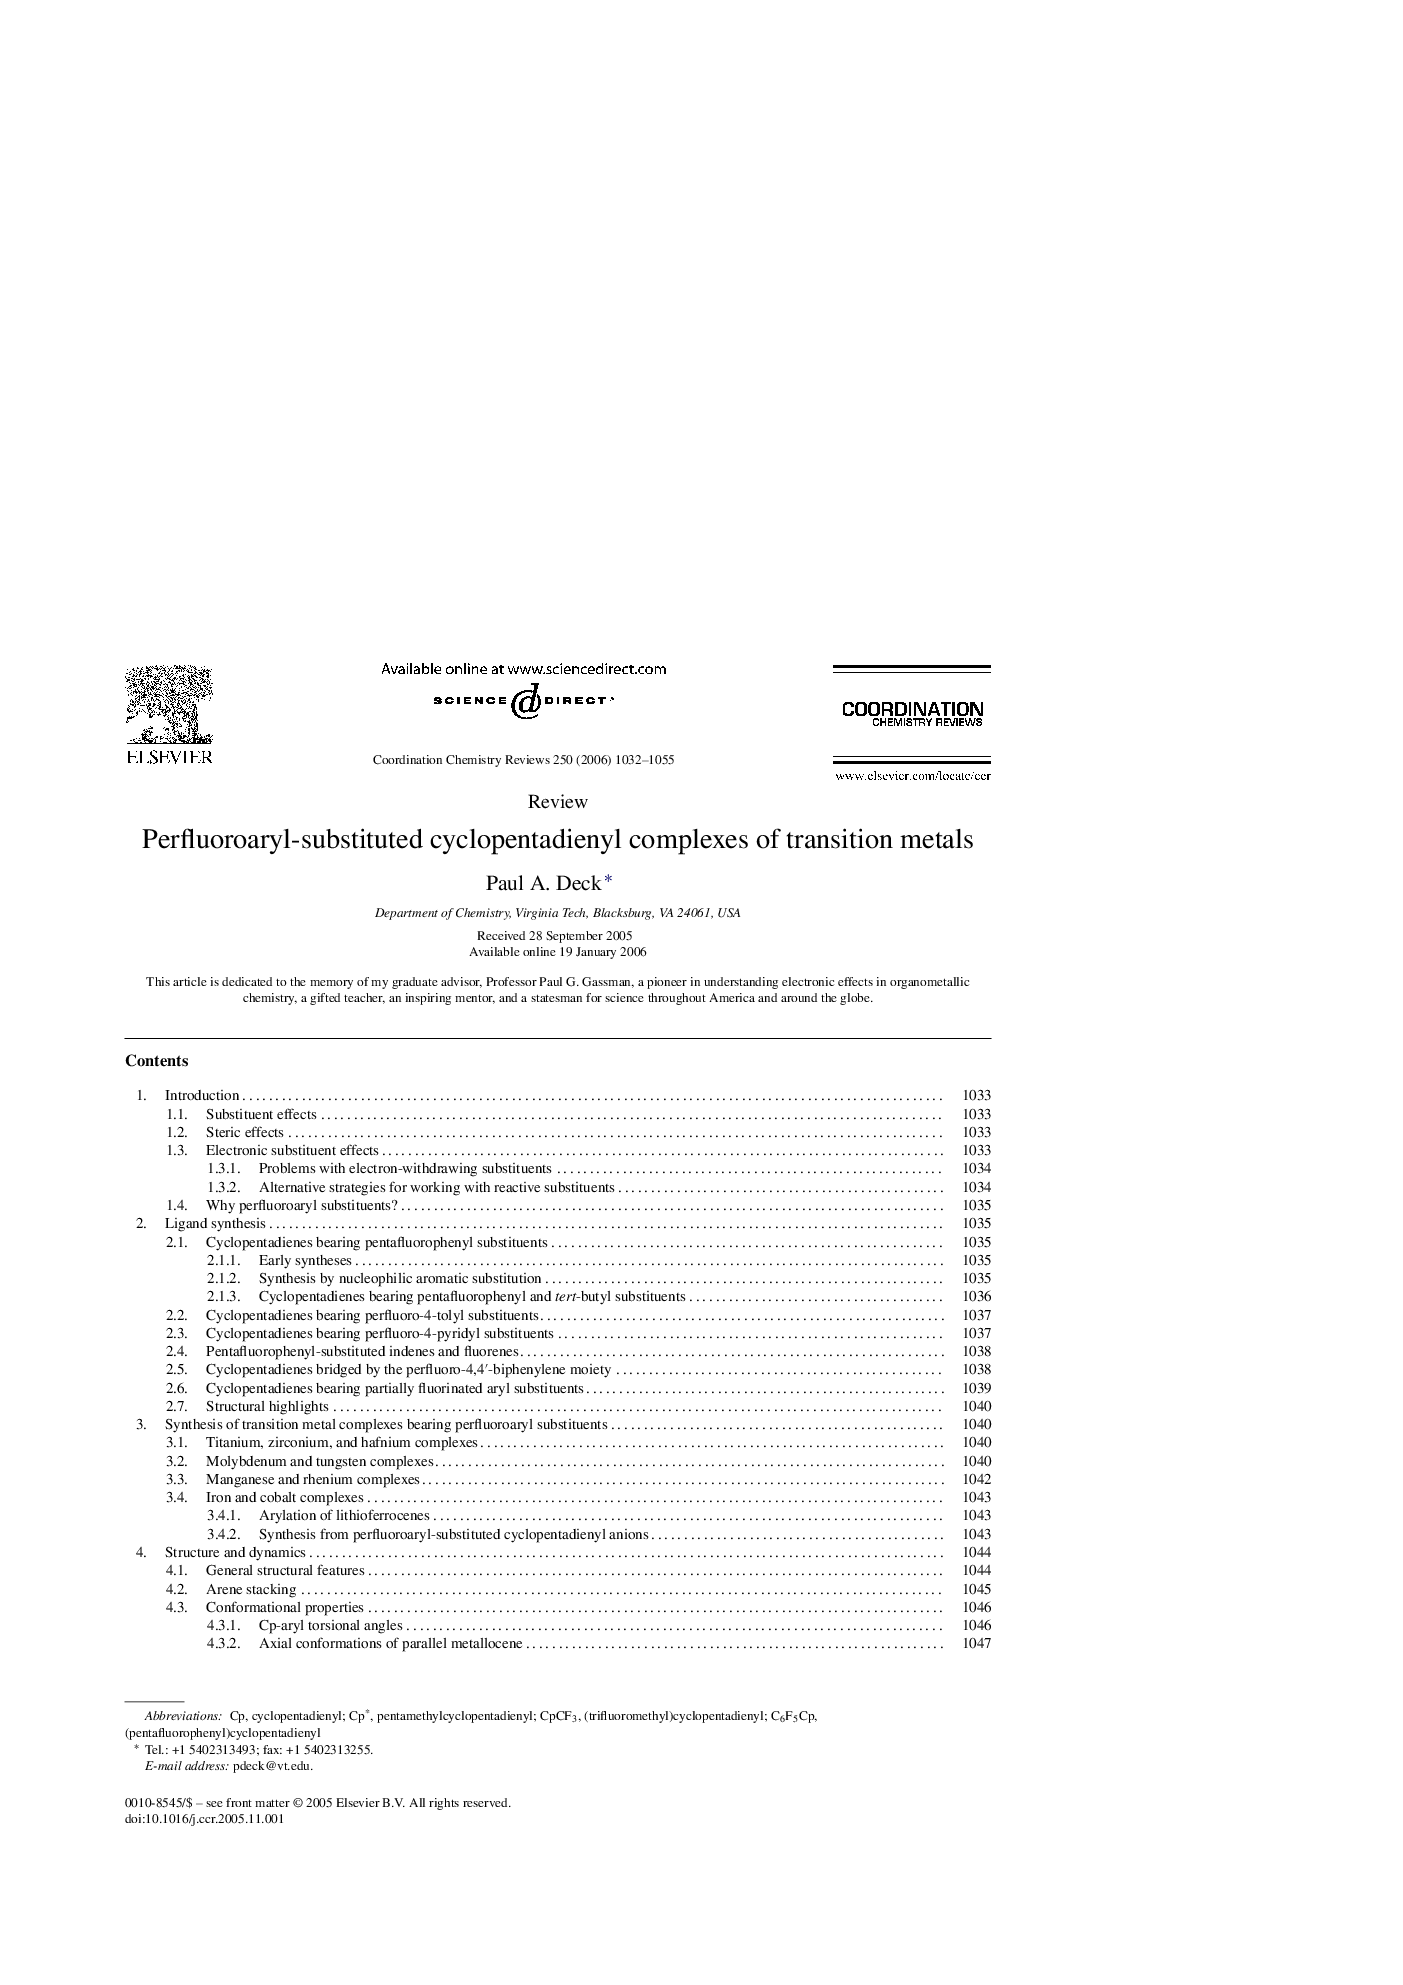 Perfluoroaryl-substituted cyclopentadienyl complexes of transition metals